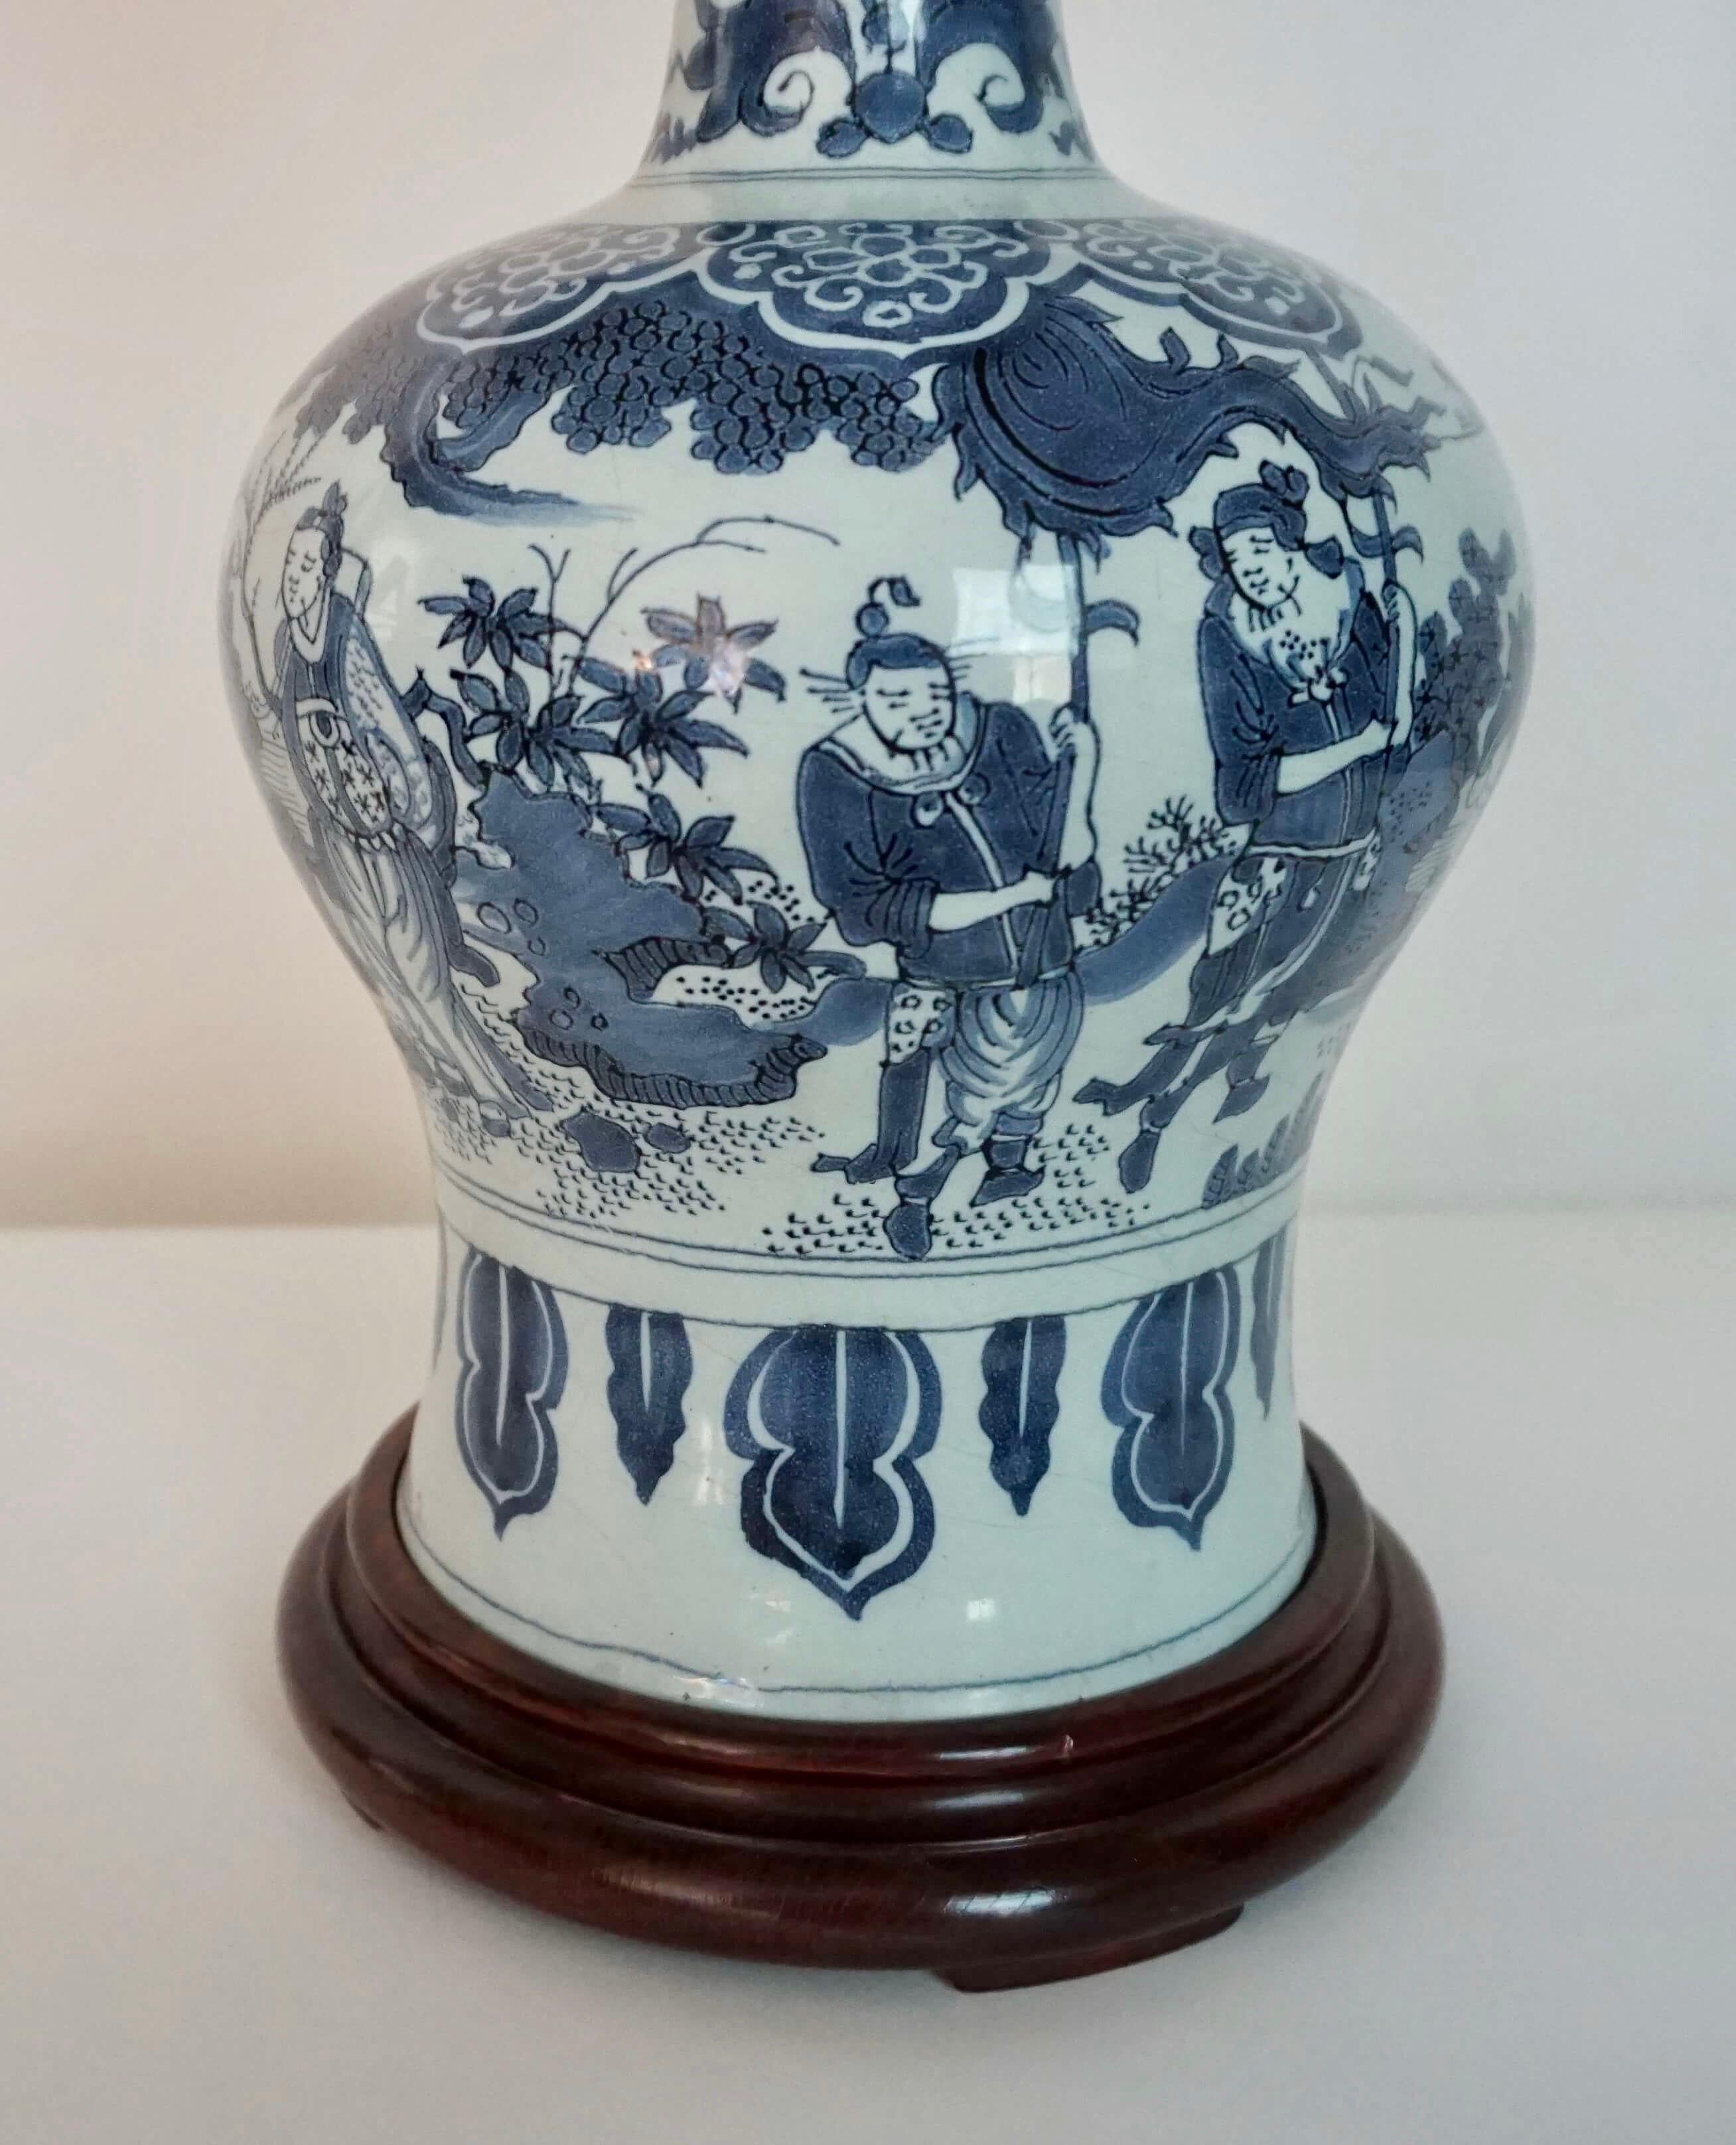 Chinoiserie Blue and White Dutch Delft Garlic Neck Vase now Table Lamp, circa 1700